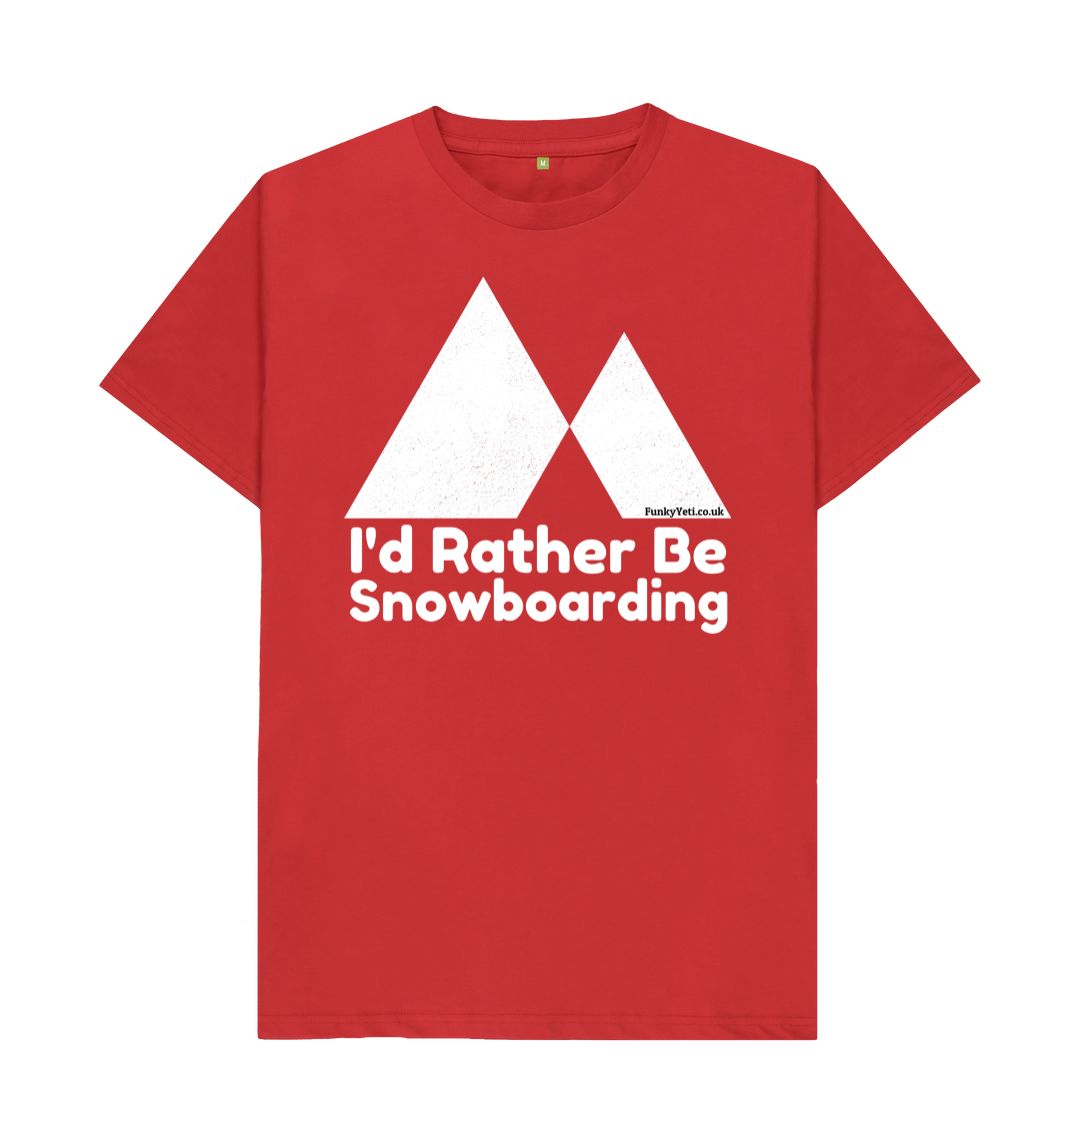 Red Funky Yeti Men's Tee - I'd Rather Be Snowboarding